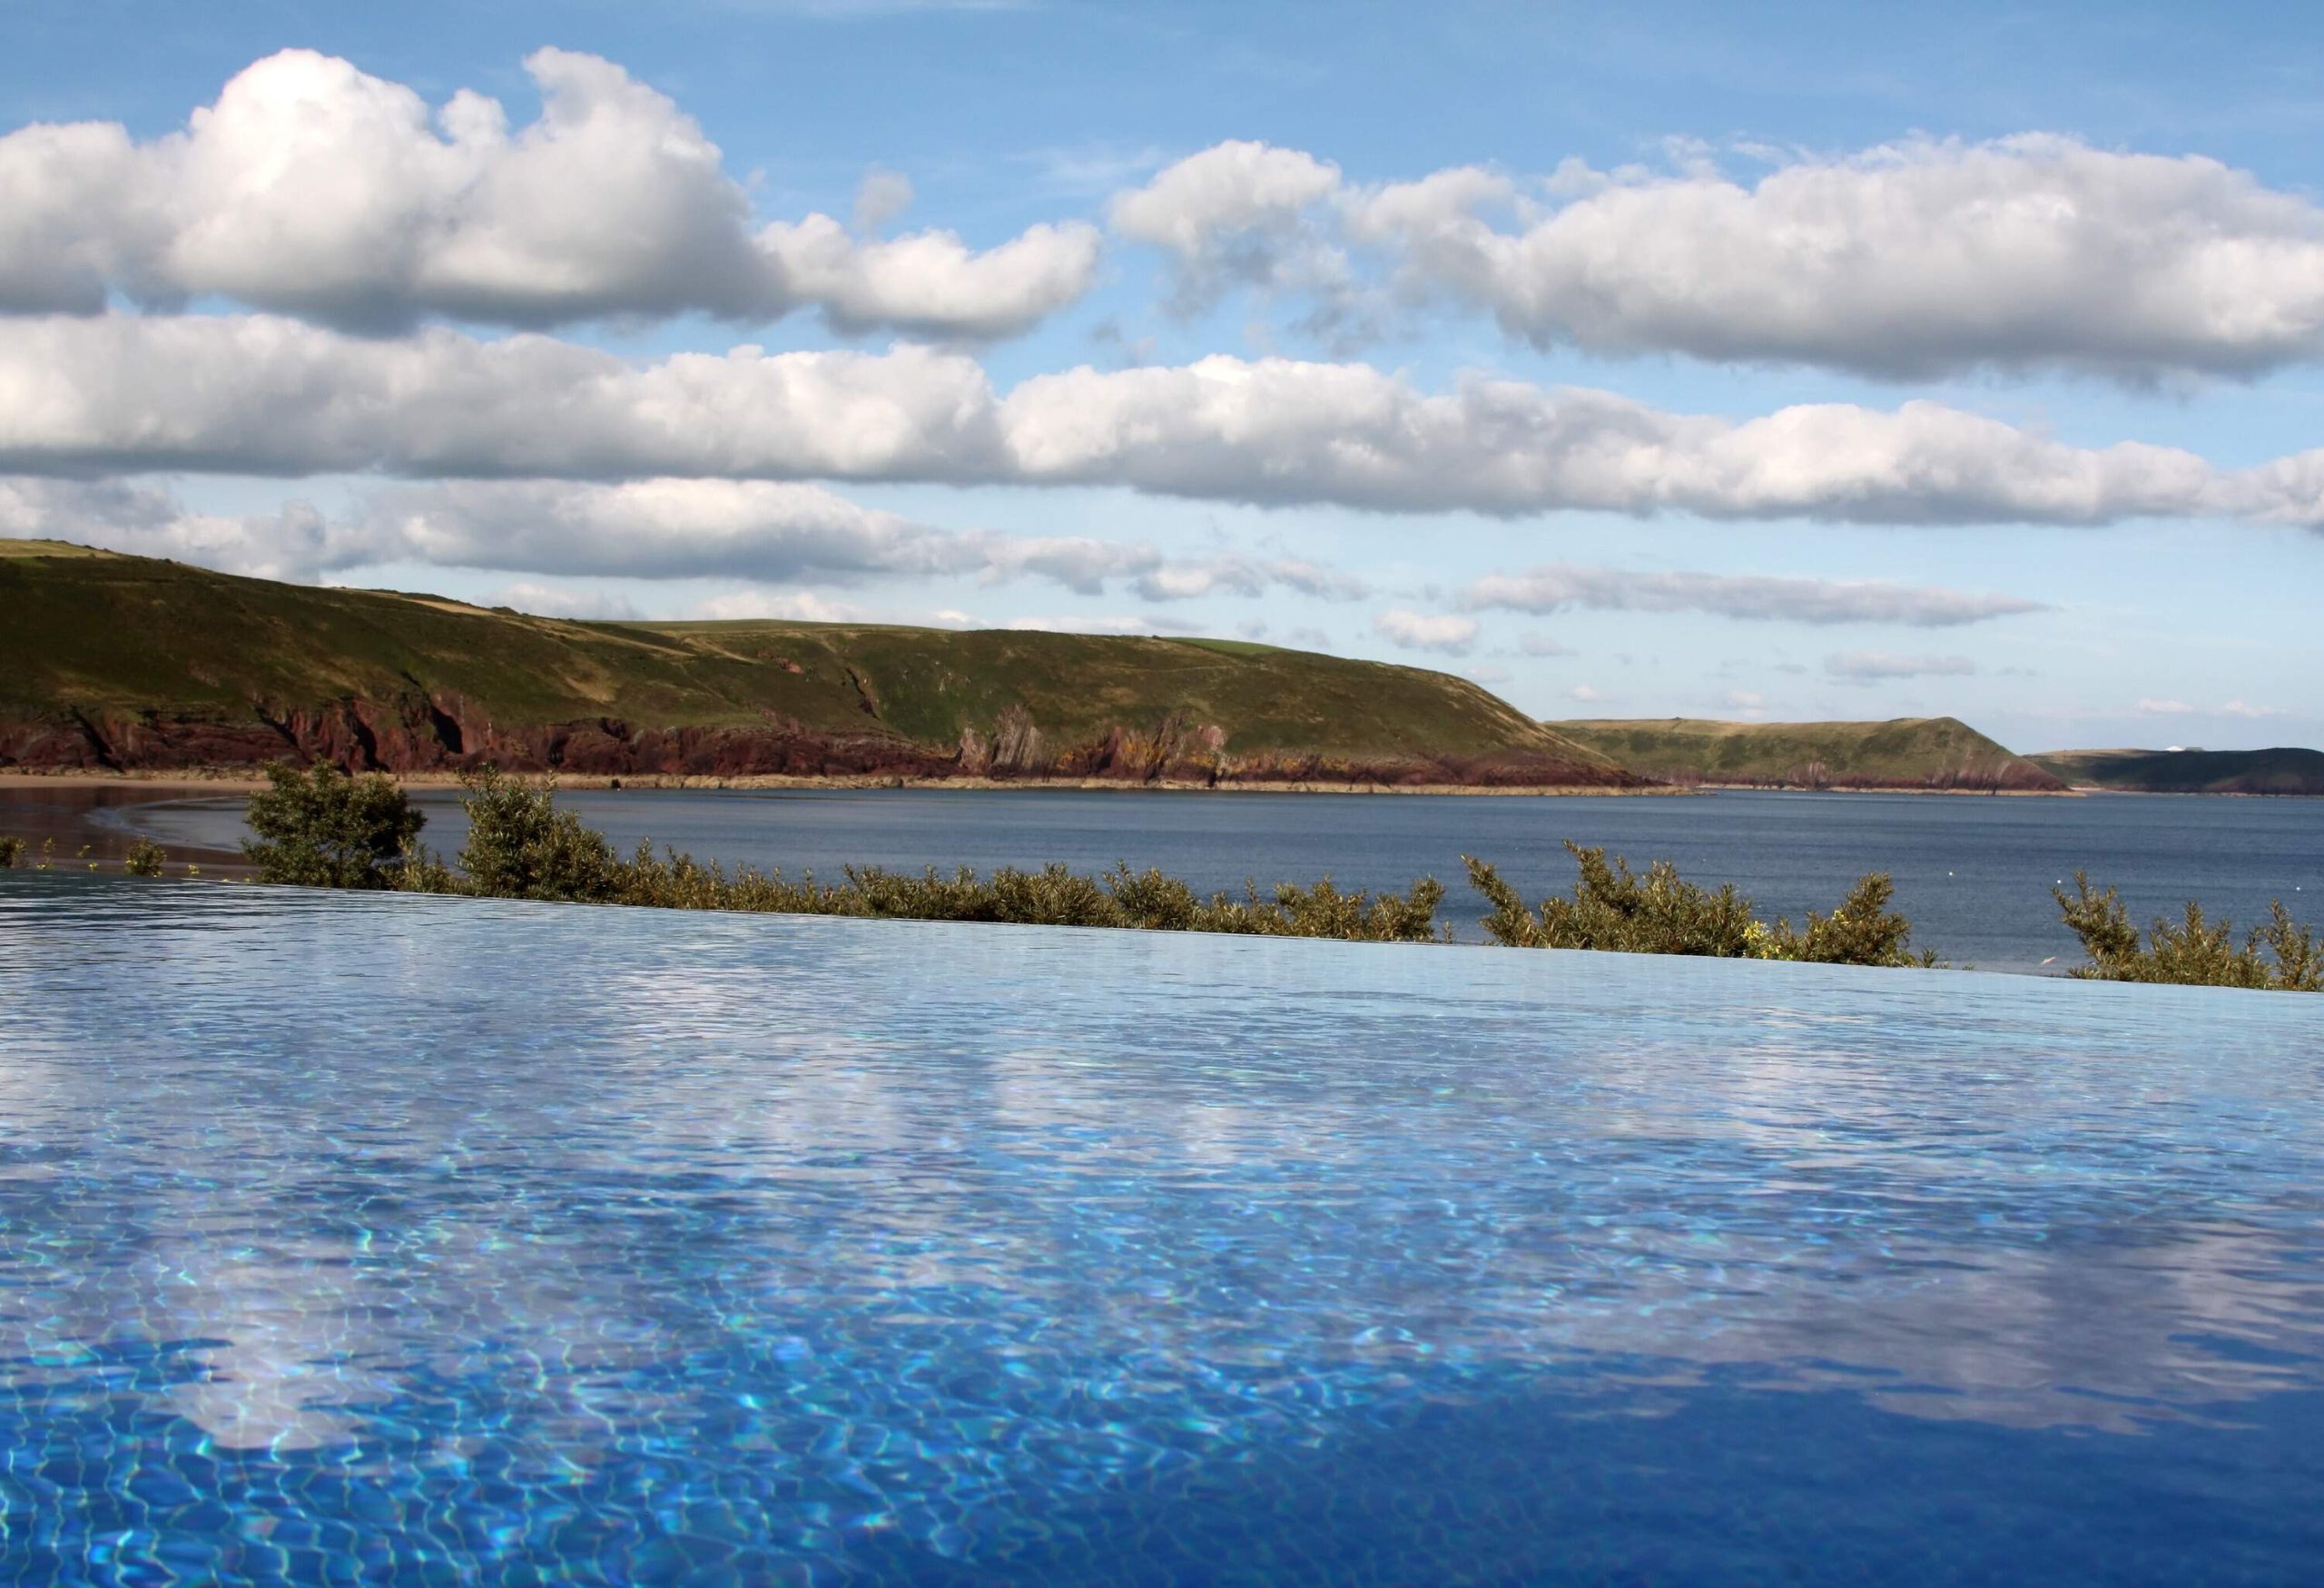 Infinity swimming pool at holiday cottage, looking out onto freshwater Beach, Pembrokeshire coastline, Wales.